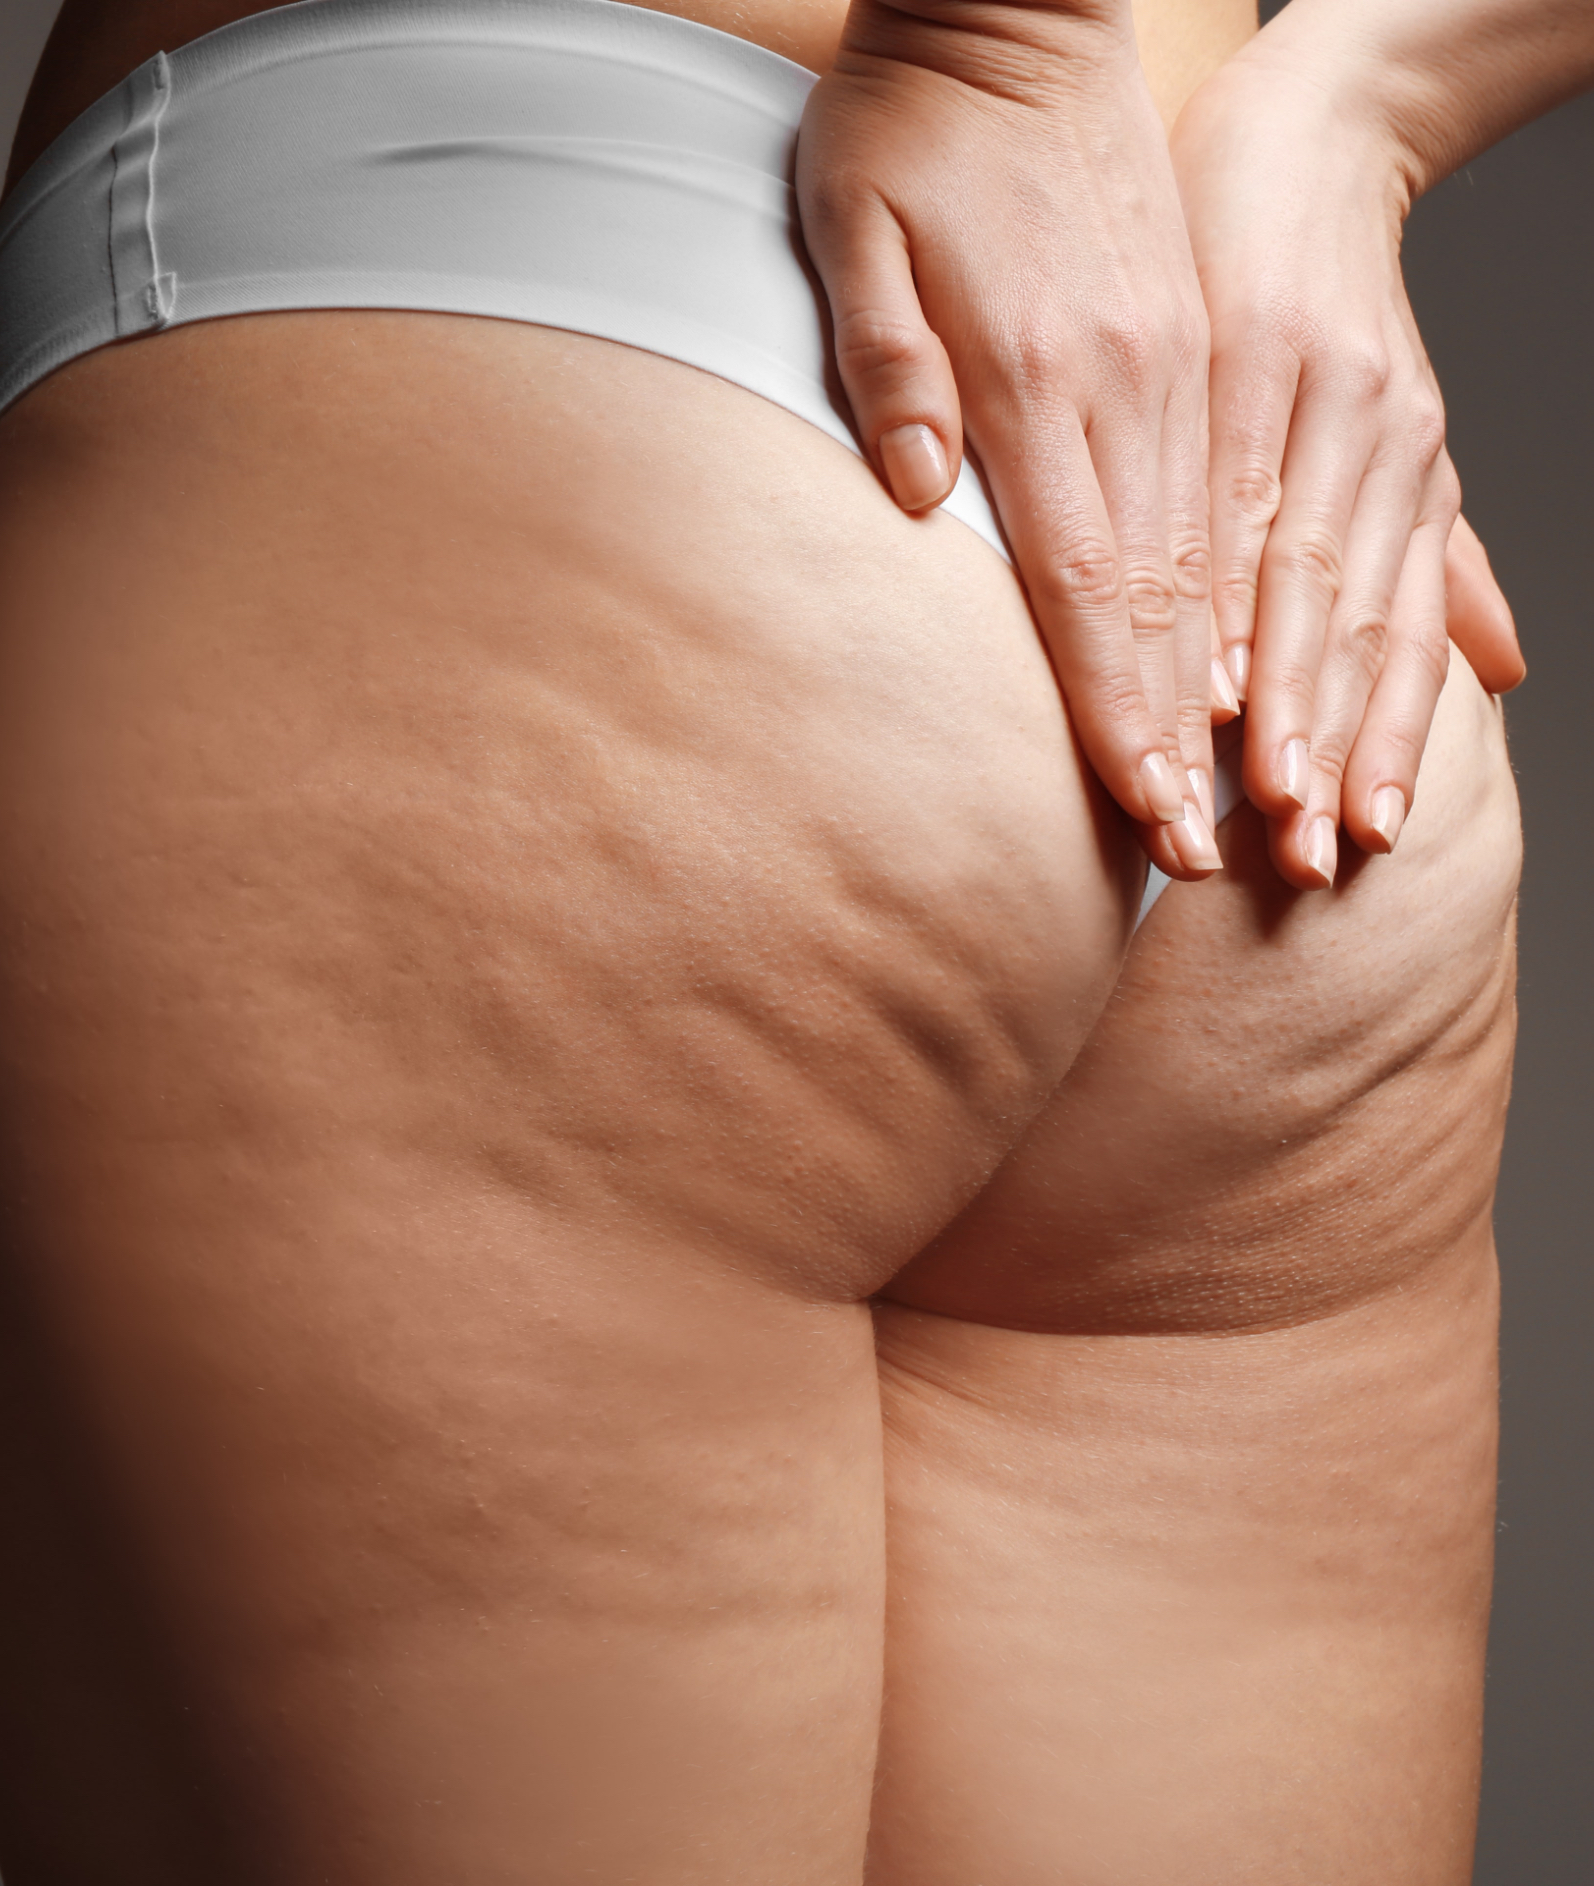 Cellulite on a woman's buttocks